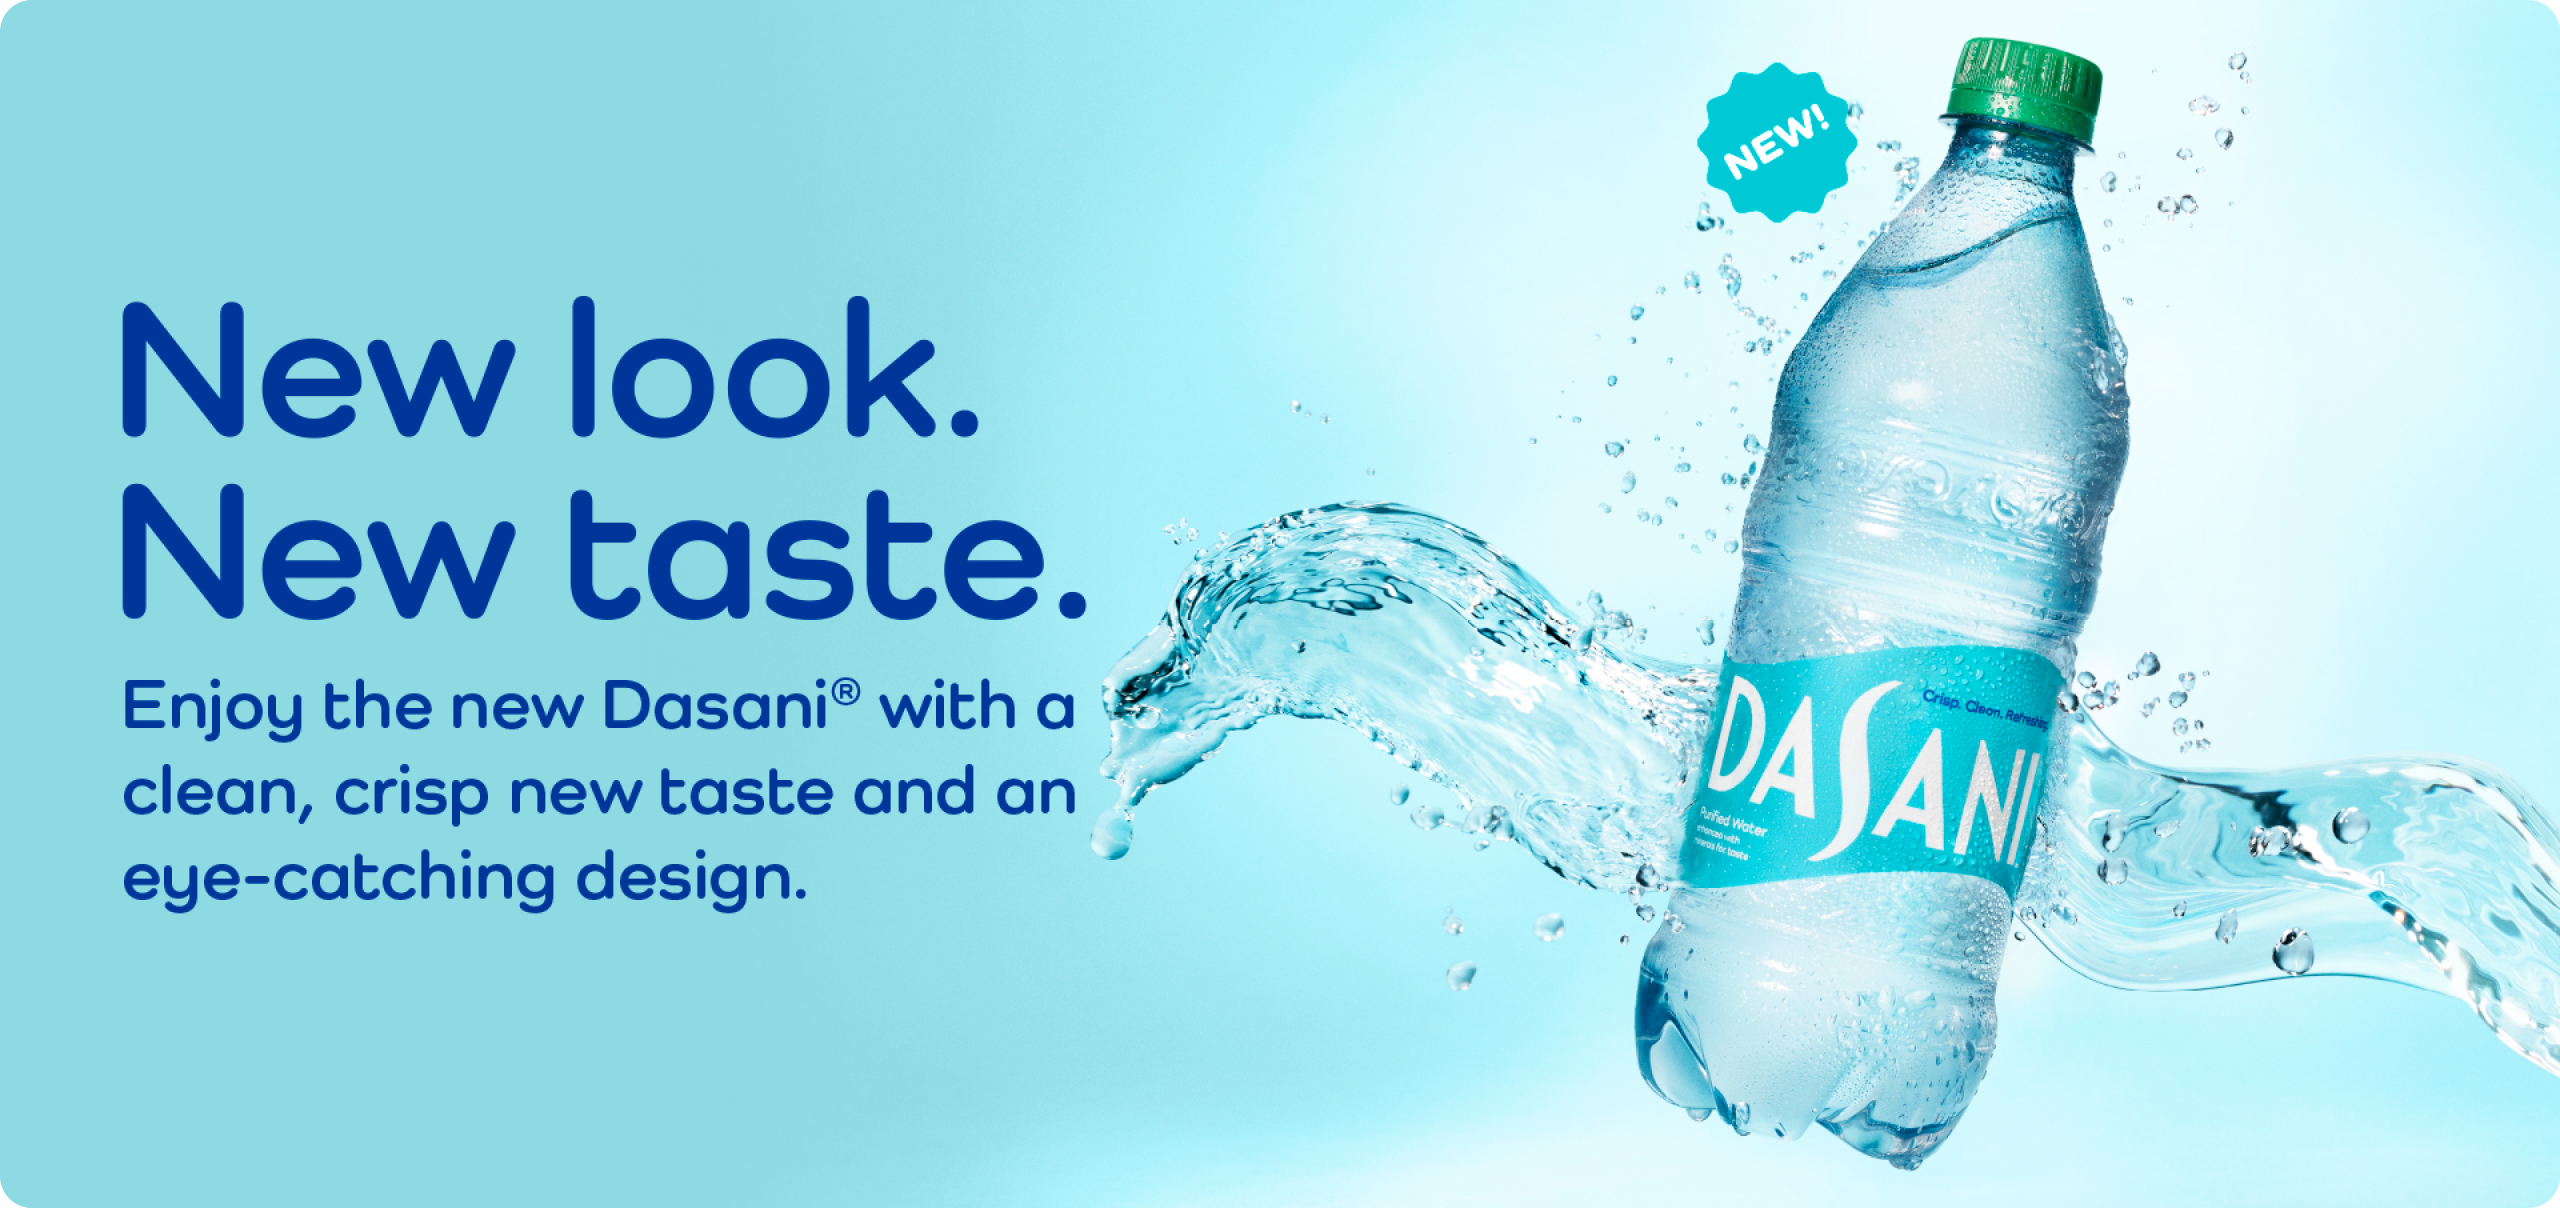 Light aqua background with light waves on the right with text that reads "New look. New taste. Enjoy the new Dasani with a clean, crisp new taste and an eye-catching design.""